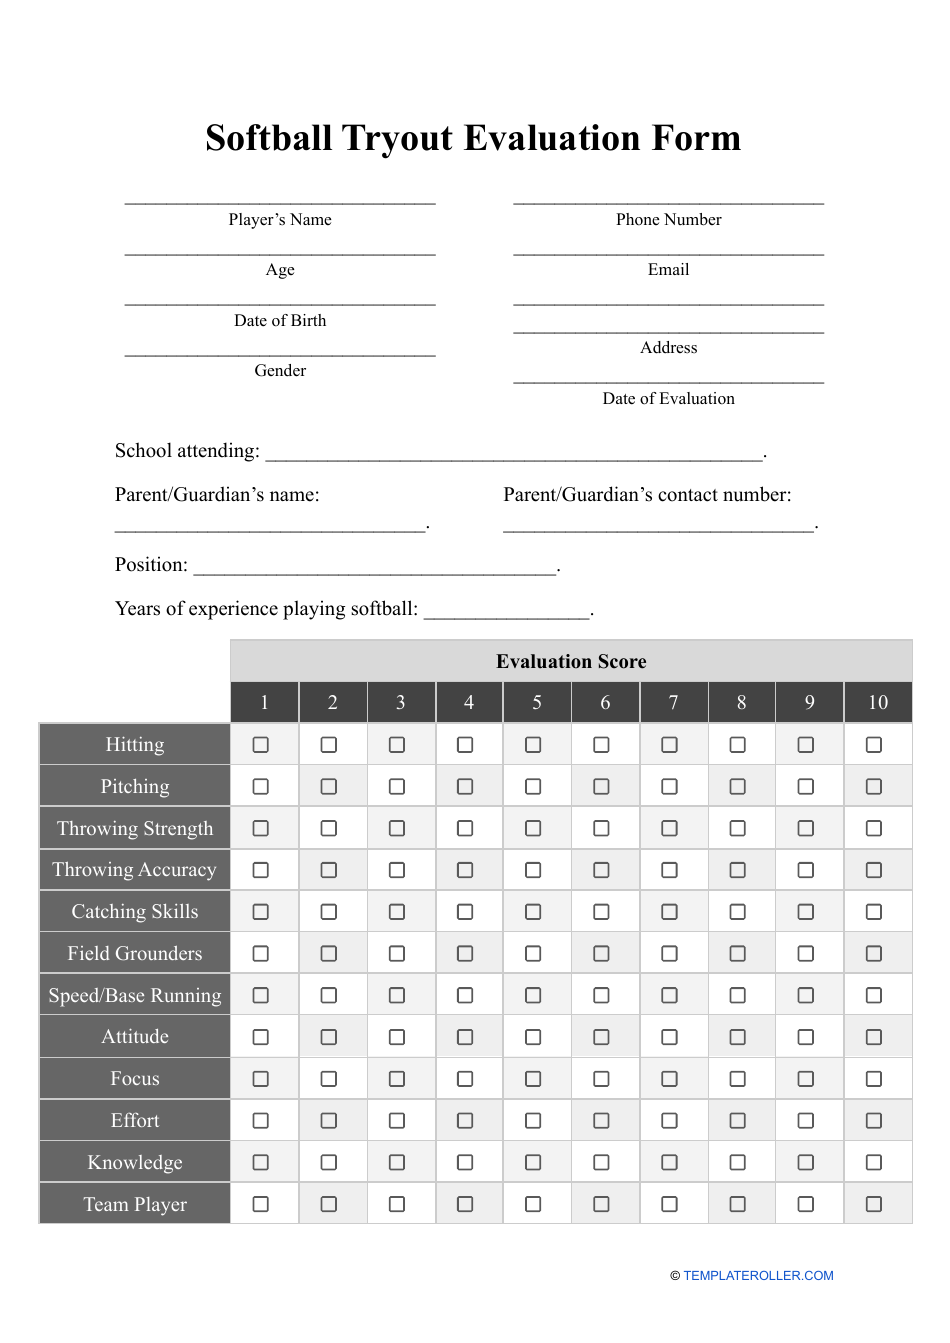 Softball Tryout Evaluation Form, Page 1